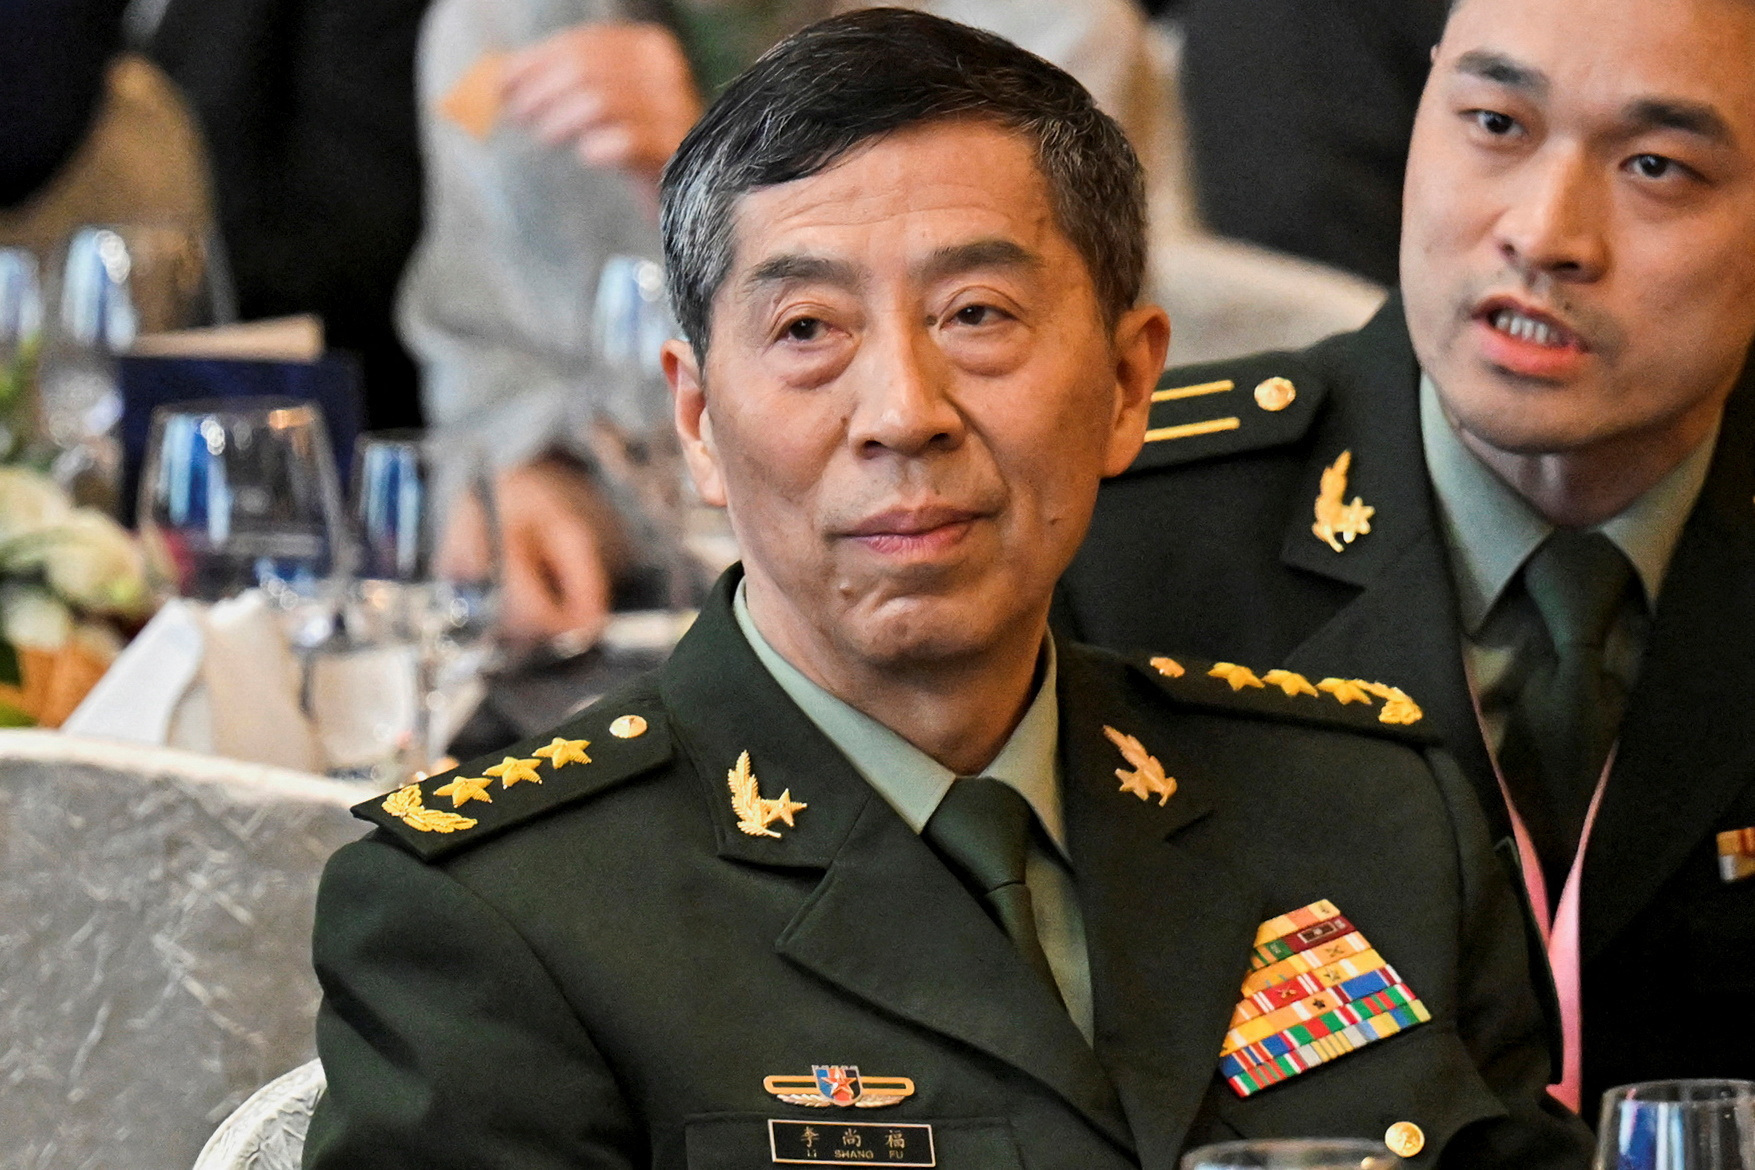 Defence minister's disappearance latest case of missing Chinese official